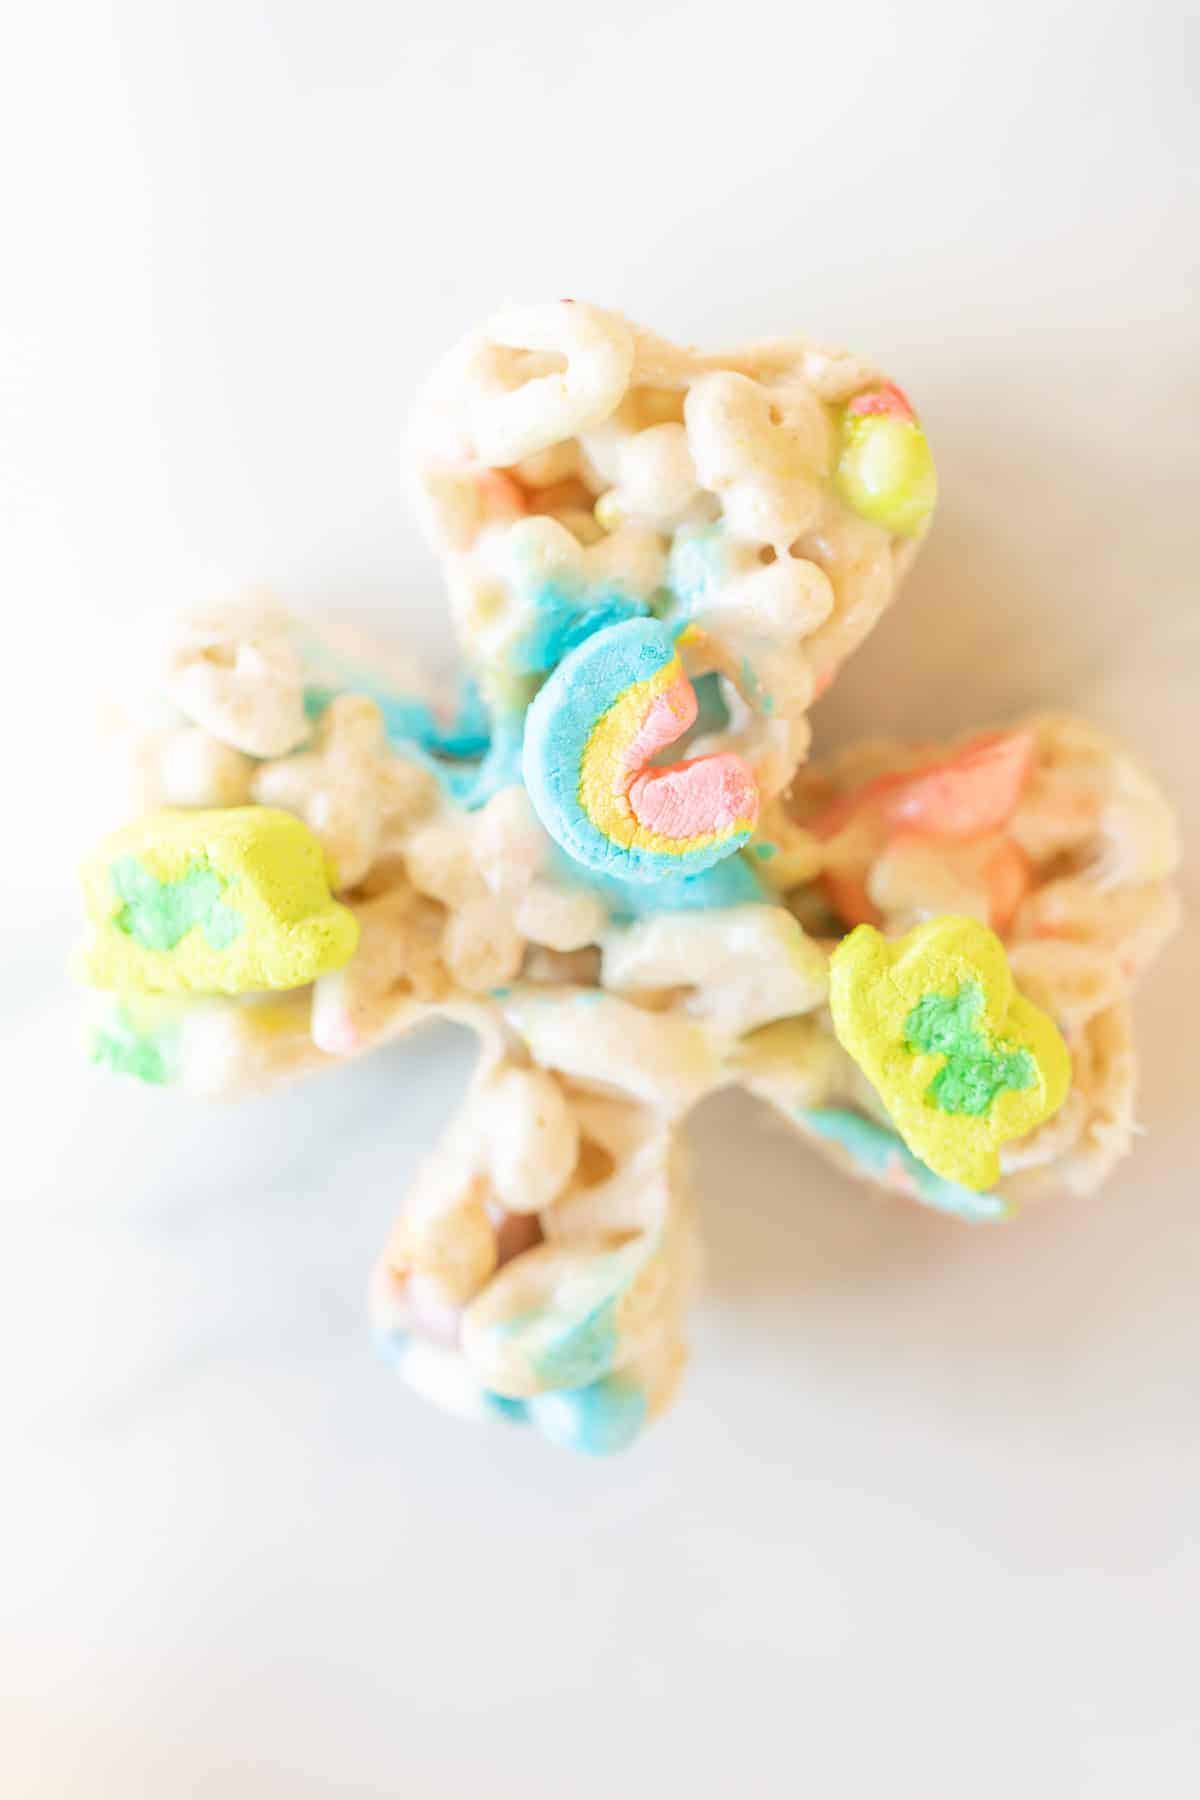 marshmallow treat with lucky charms in shamrock shape